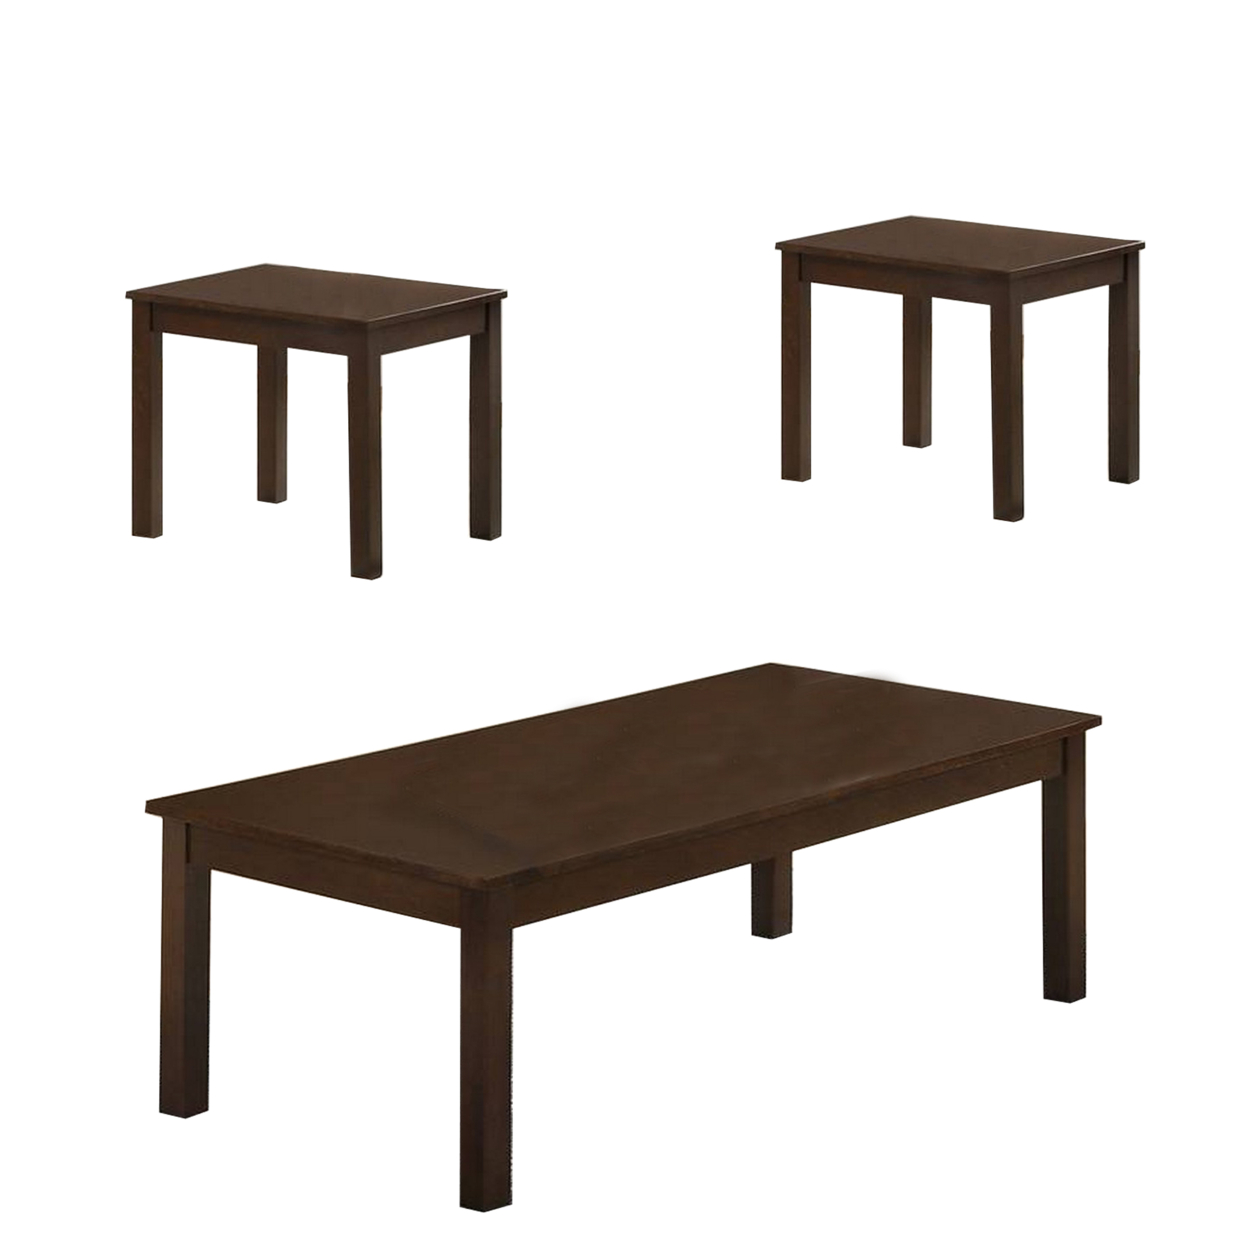 3 Piece Transitional Coffee Table And End Table With Block Legs, Brown- Saltoro Sherpi